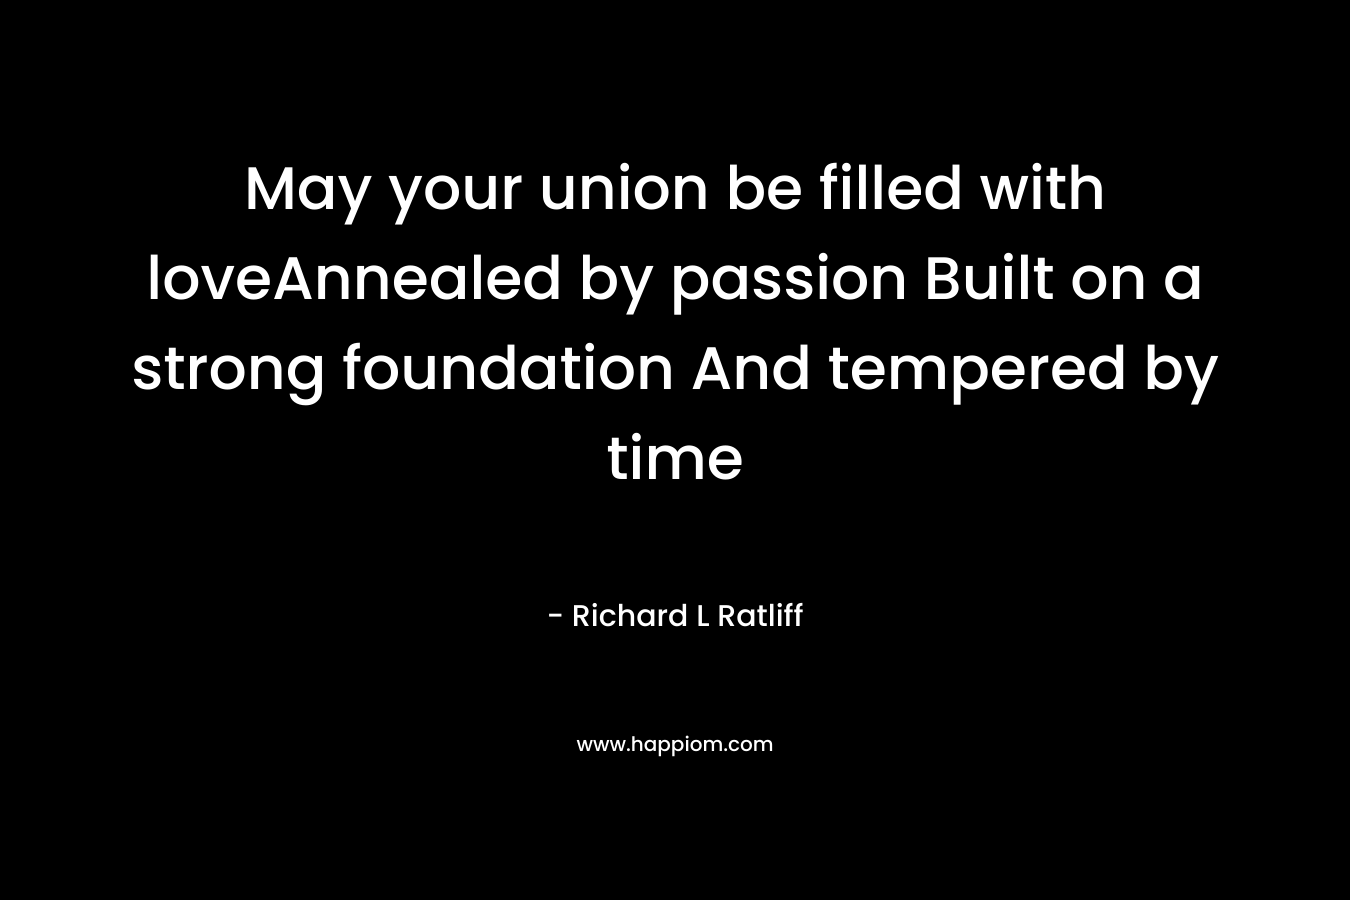 May your union be filled with loveAnnealed by passion Built on a strong foundation And tempered by time